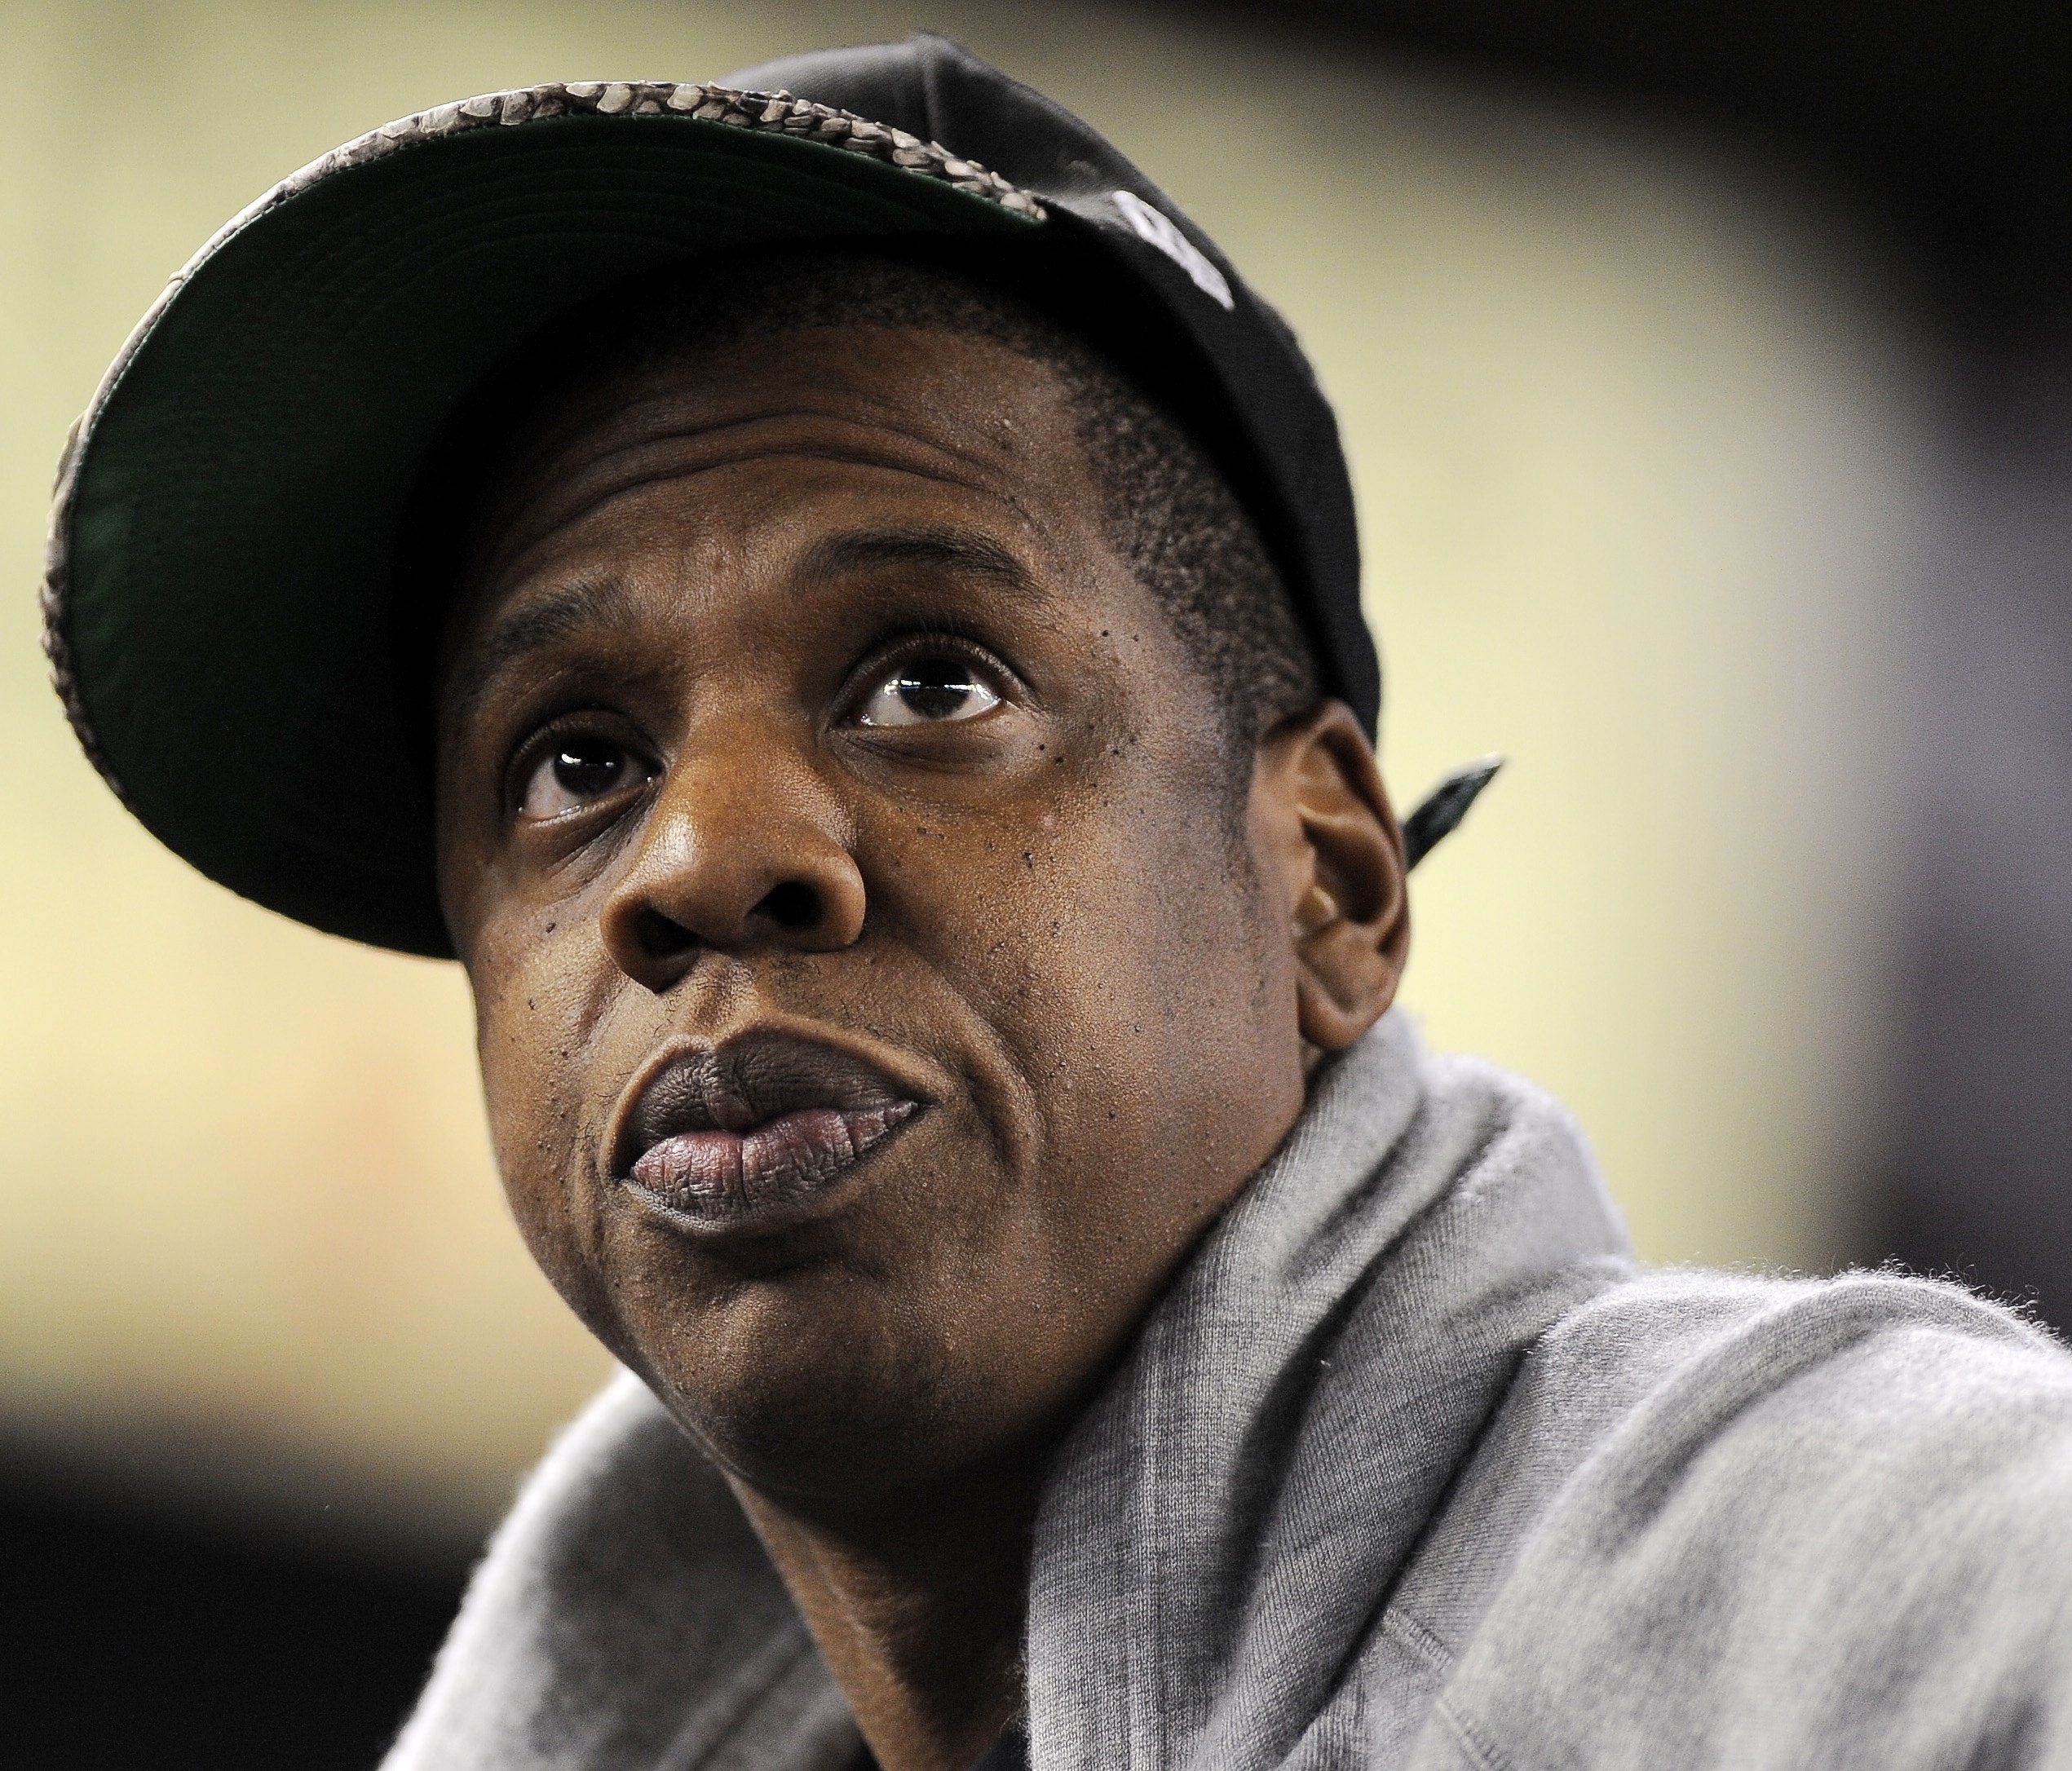 epa06355890 (FILE) - Music mogul Jay-Z watches game five of the American League Division Series playoffs between the New York Yankees and the Detroit Tigers at Yankees Stadium in the Bronx, New York, USA, on 06 October 2011 (reissued 28 November 2017